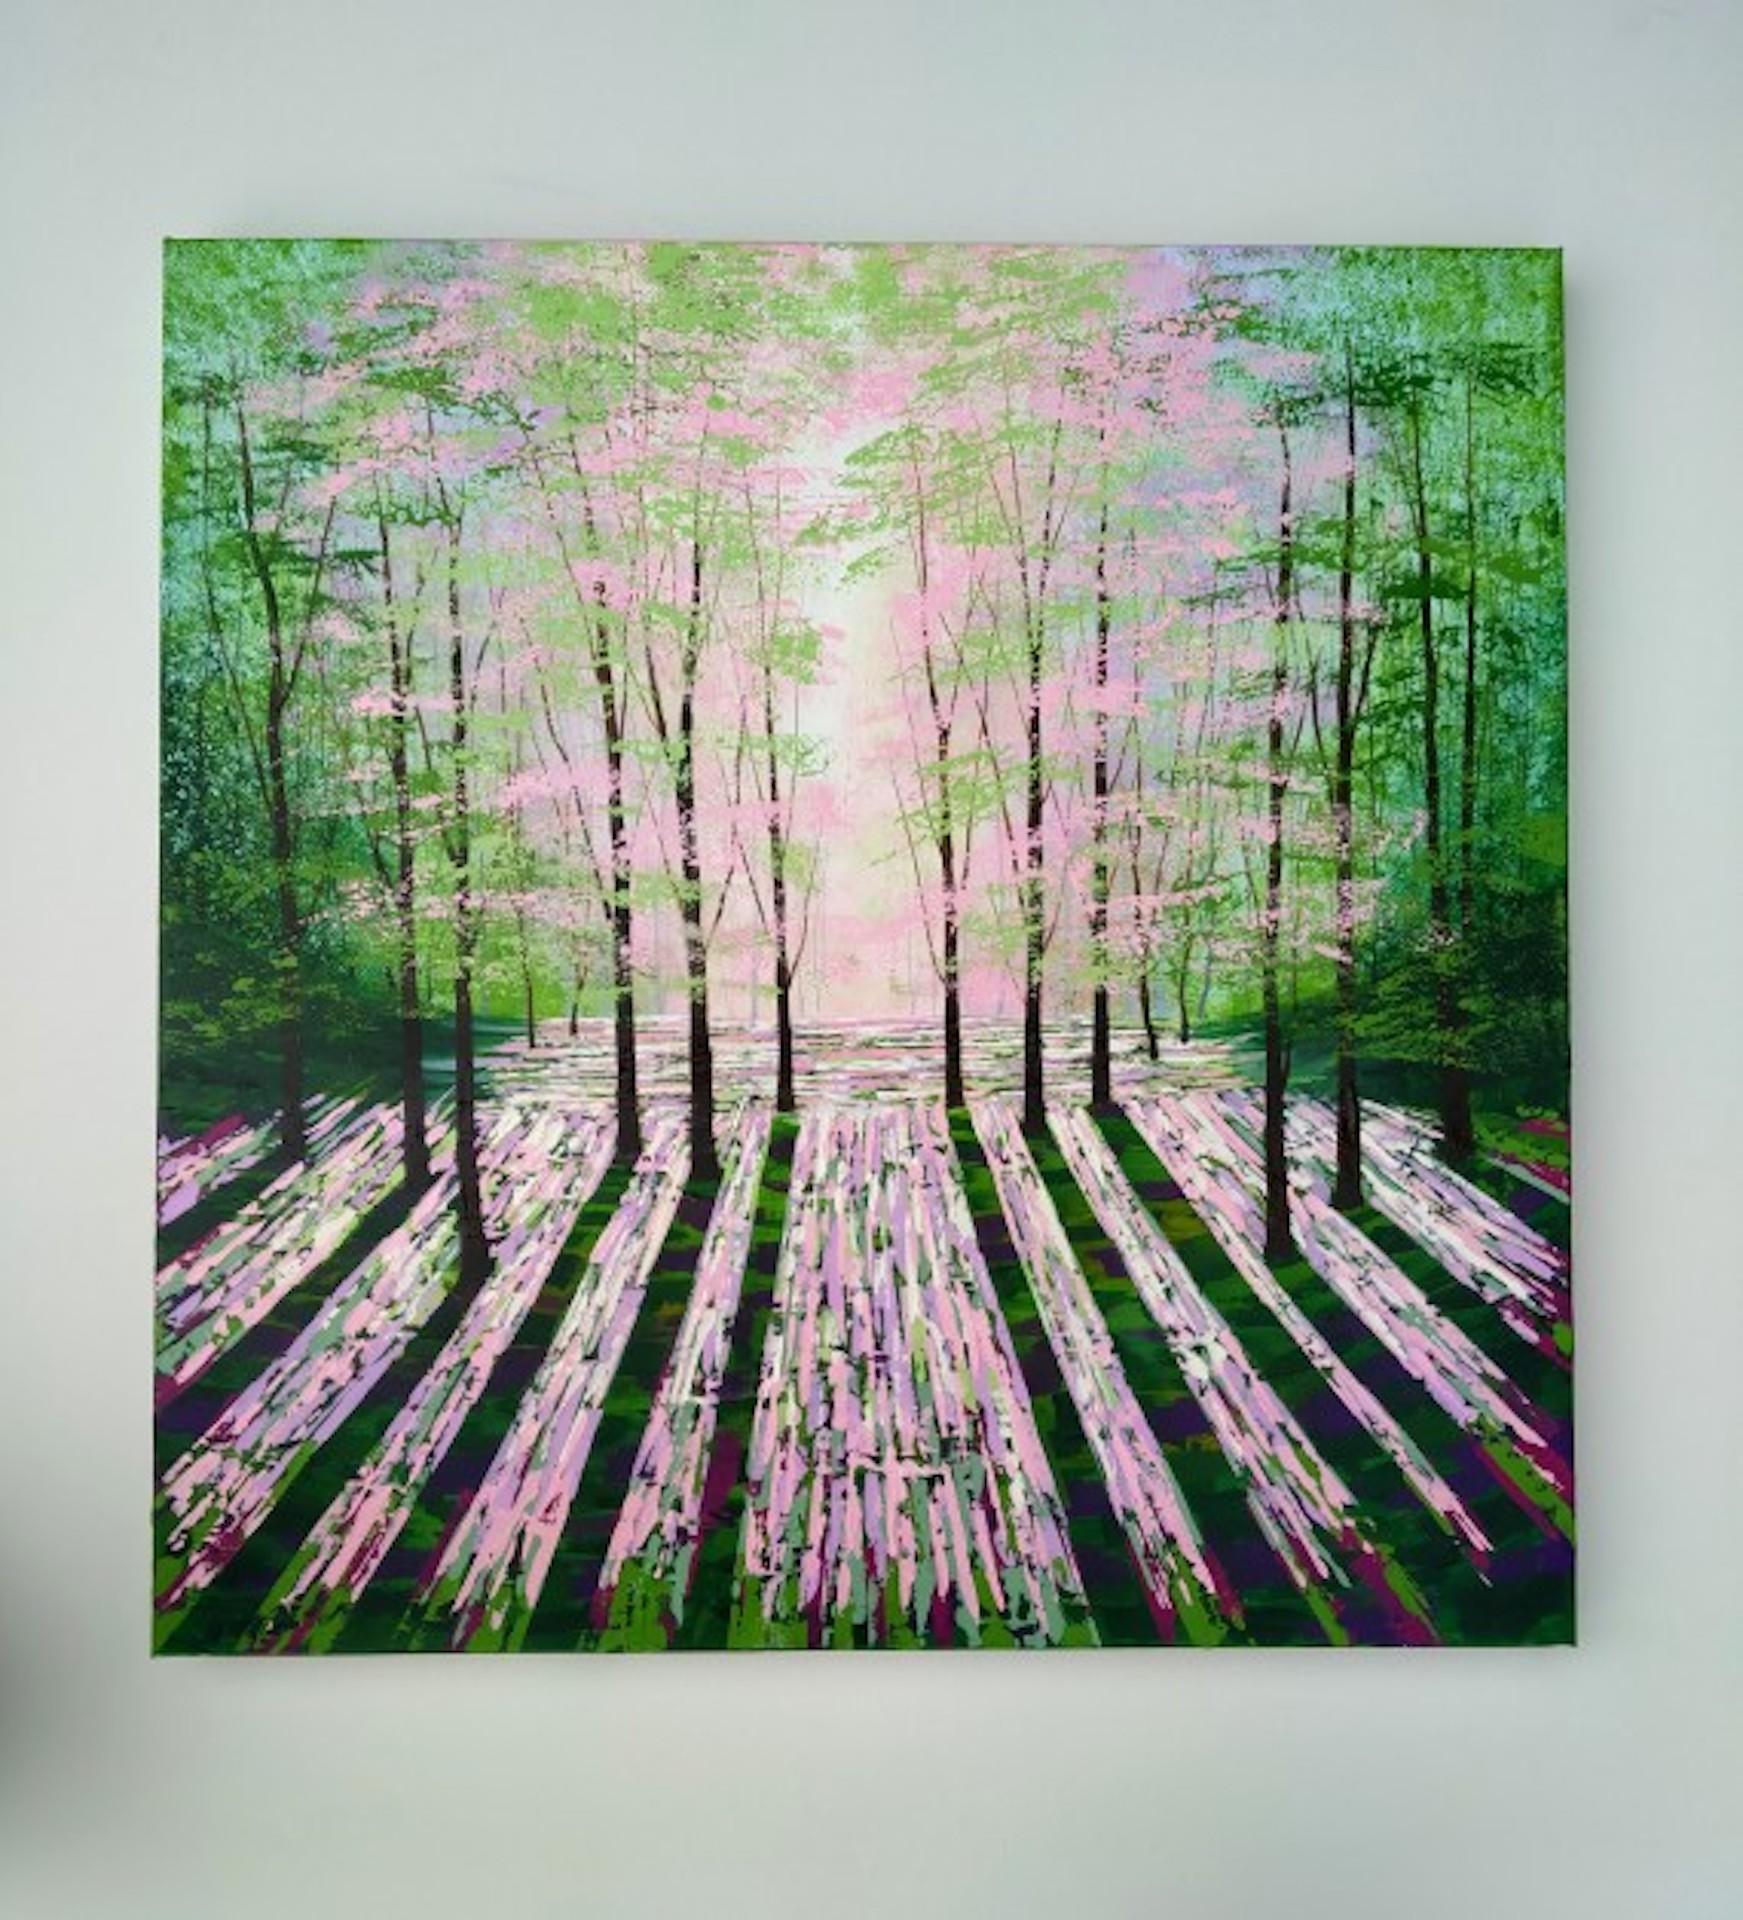 'Summer Lights' is an interpretation of the beautiful woods near my home in the Peak District. Sunlight filters through the leafy glade creating dramatic shadows and delicate light tones of pink and green. An original artwork, one of a kind, this